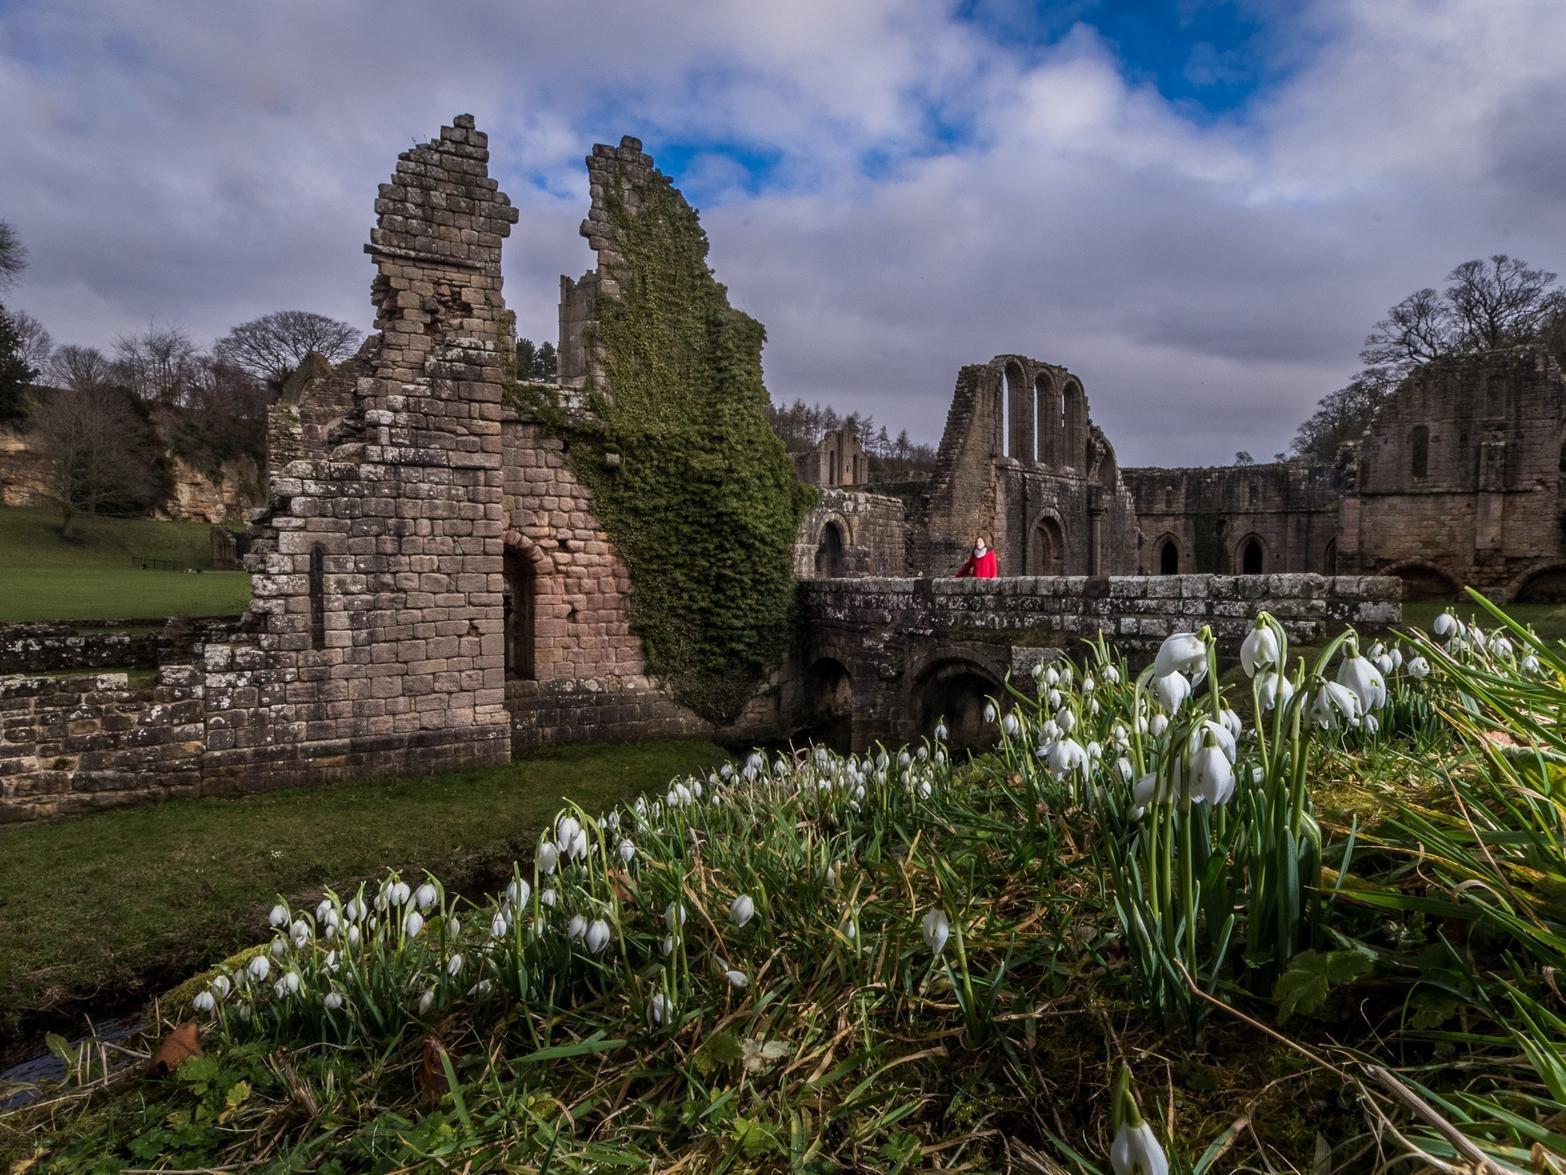 We are so lucky in Harrogate to be surrounded by so much nature, and Fountains Abbey is an amazing World Heritage site which people travel from all over the country to visit.